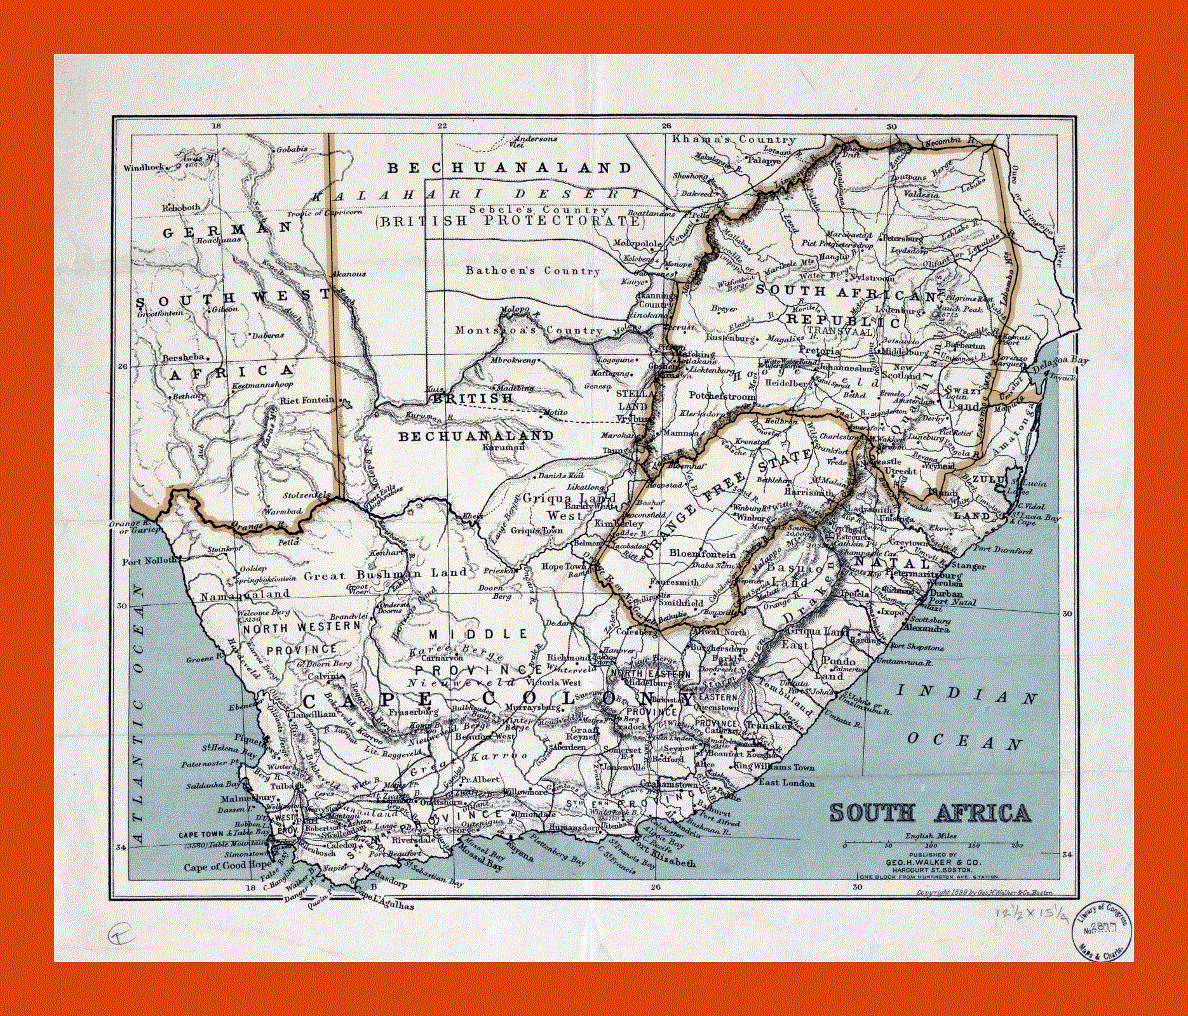 Old political map of South Africa - 1899